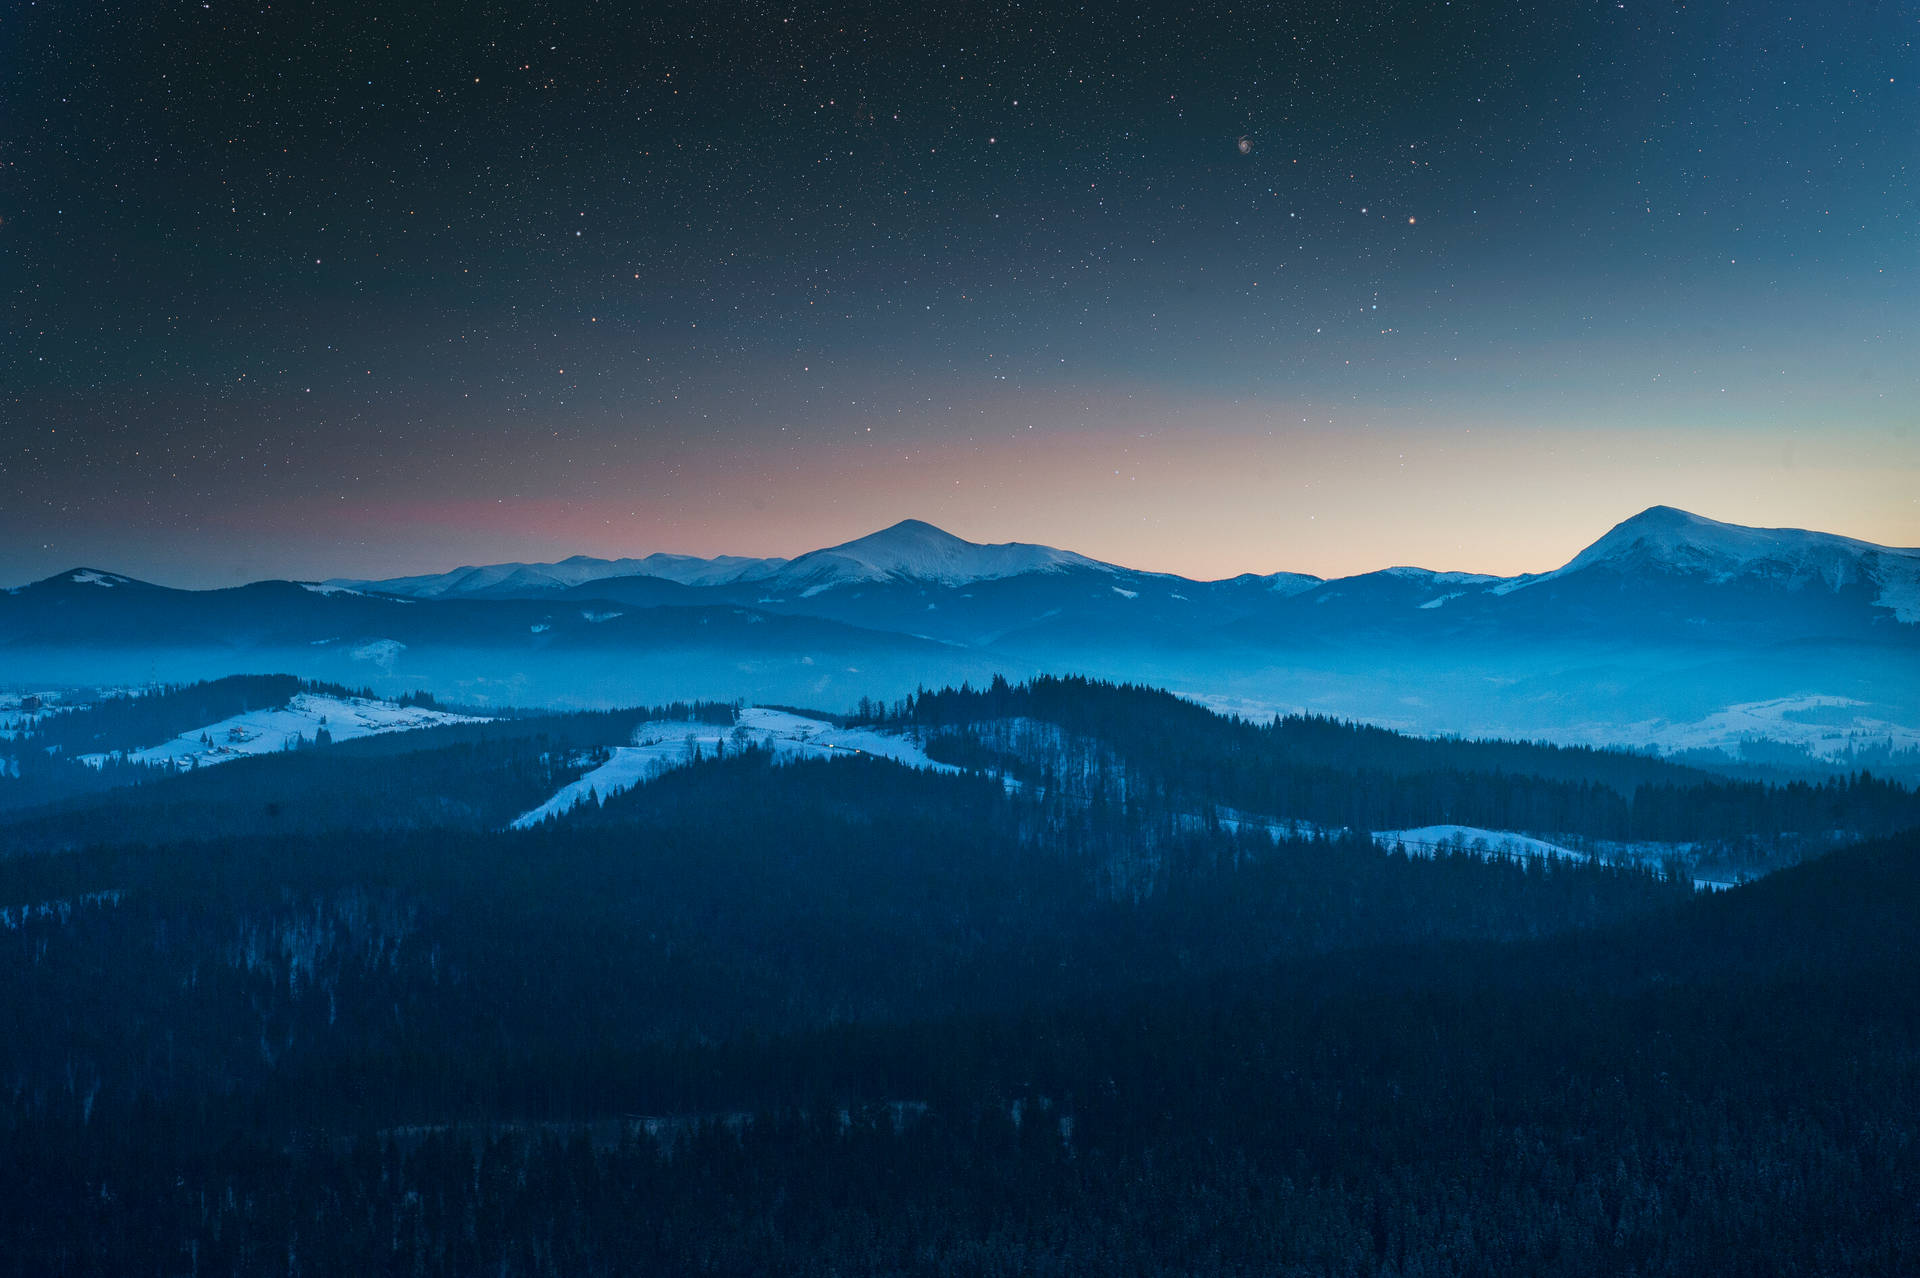 Blue Mountain Landscape During Nighttime